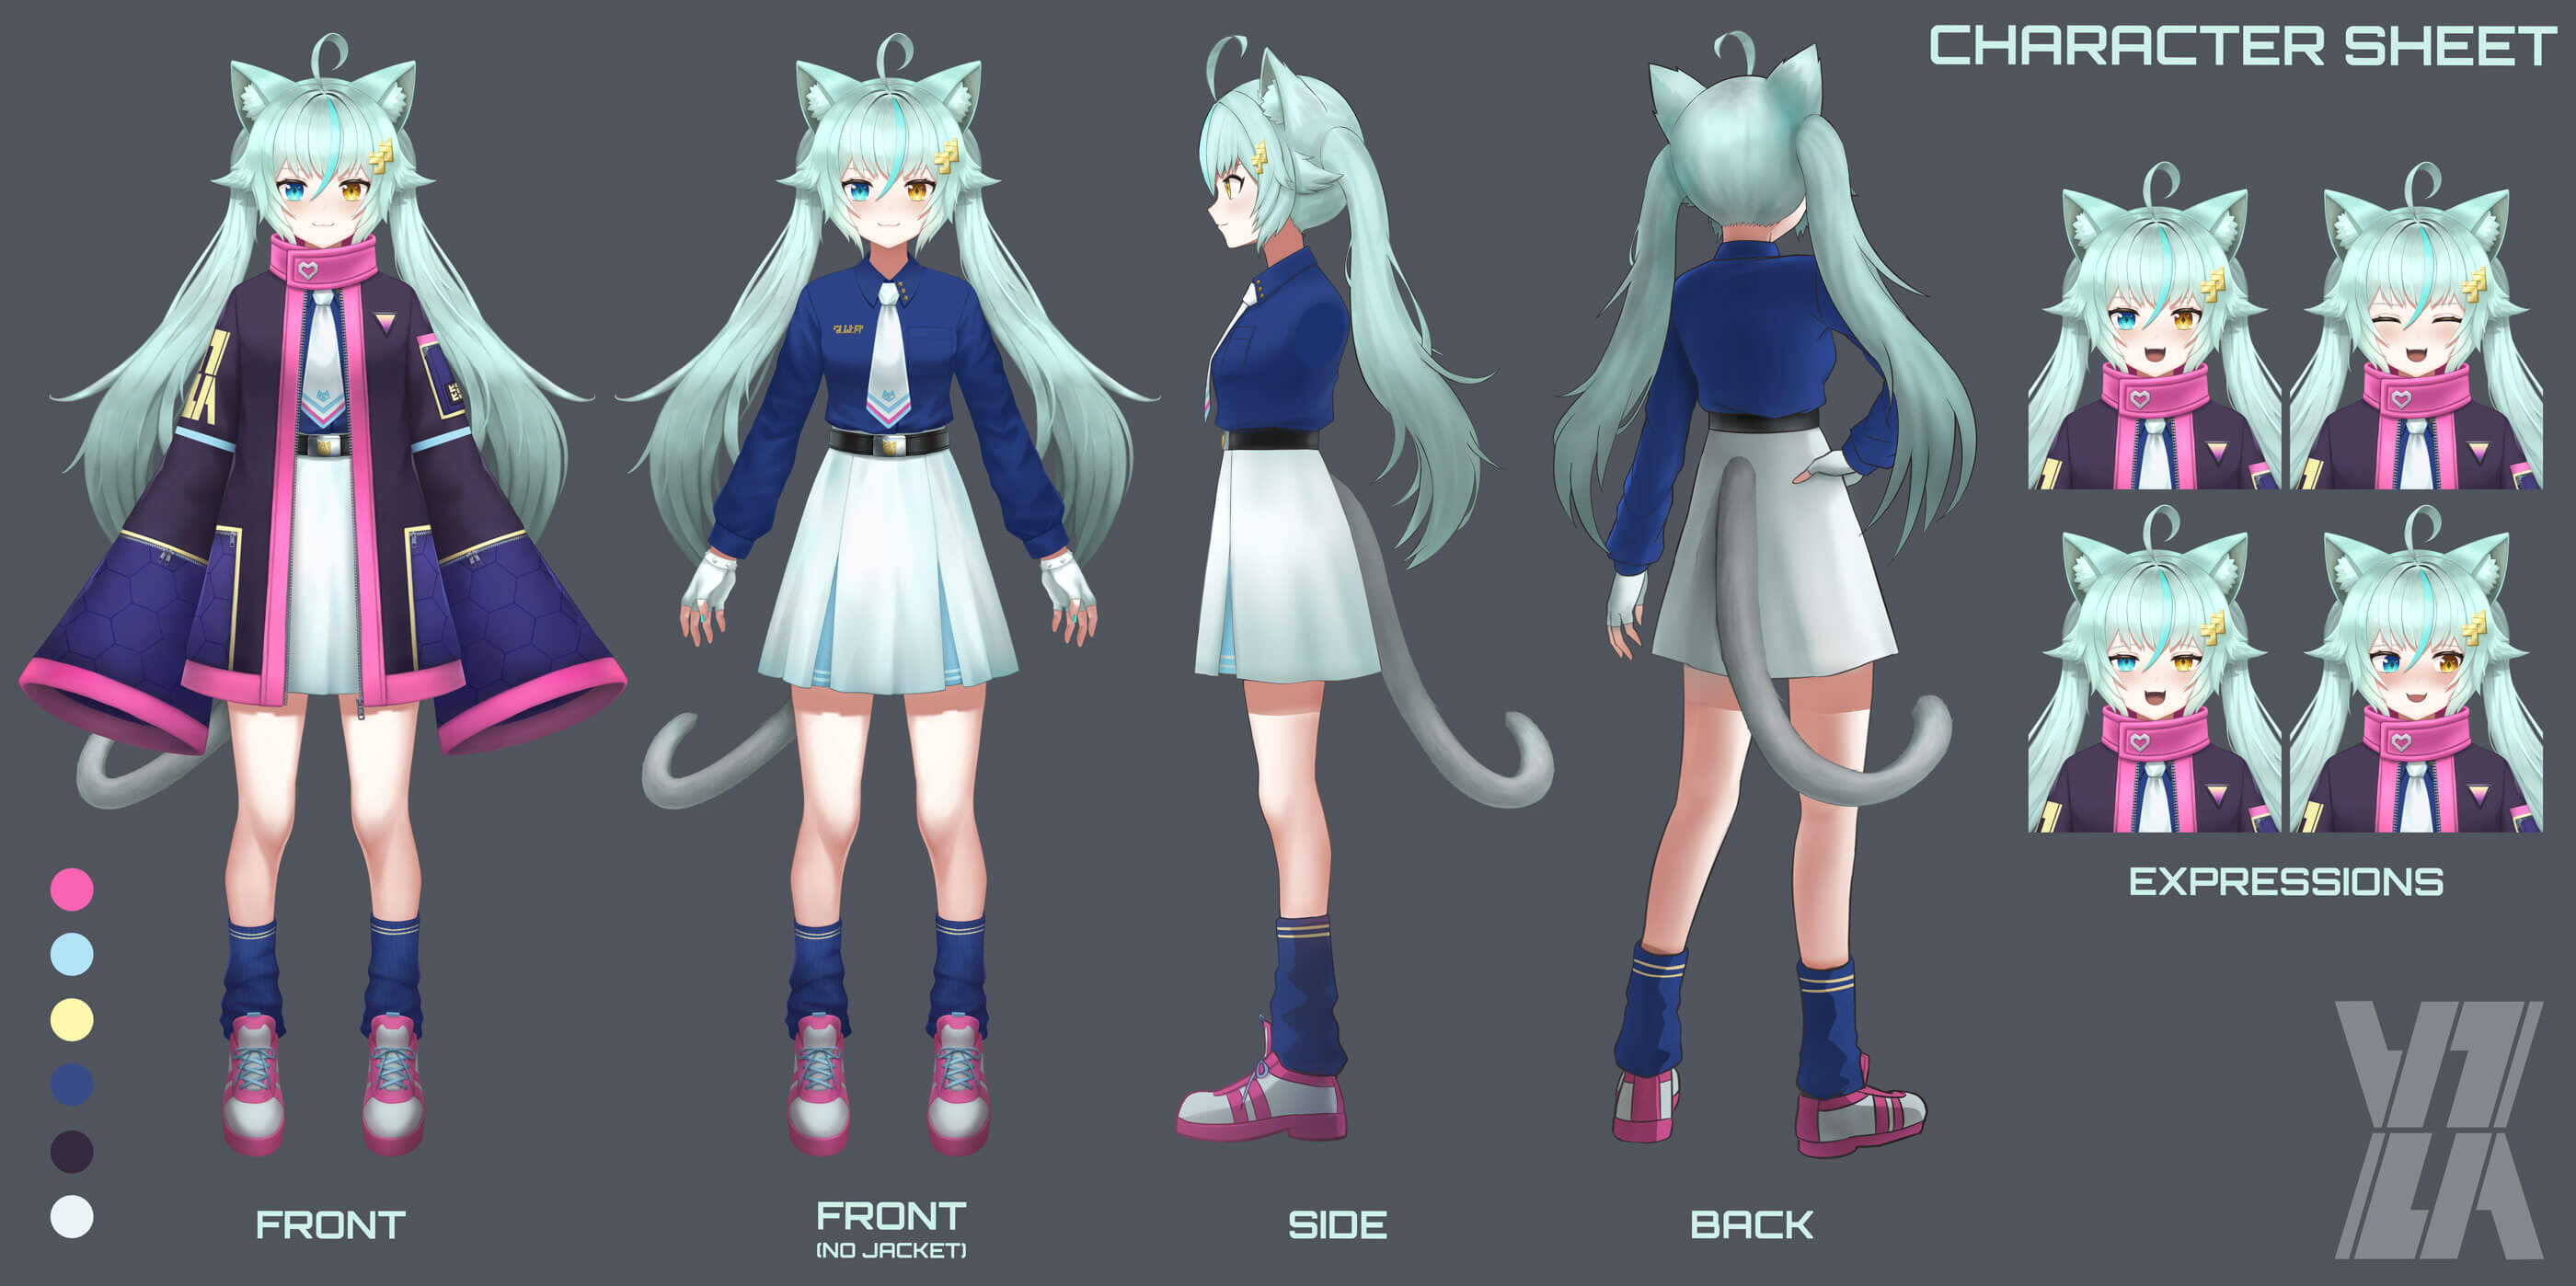 Character sheet for an anime-style girl with cat ears and a tail.